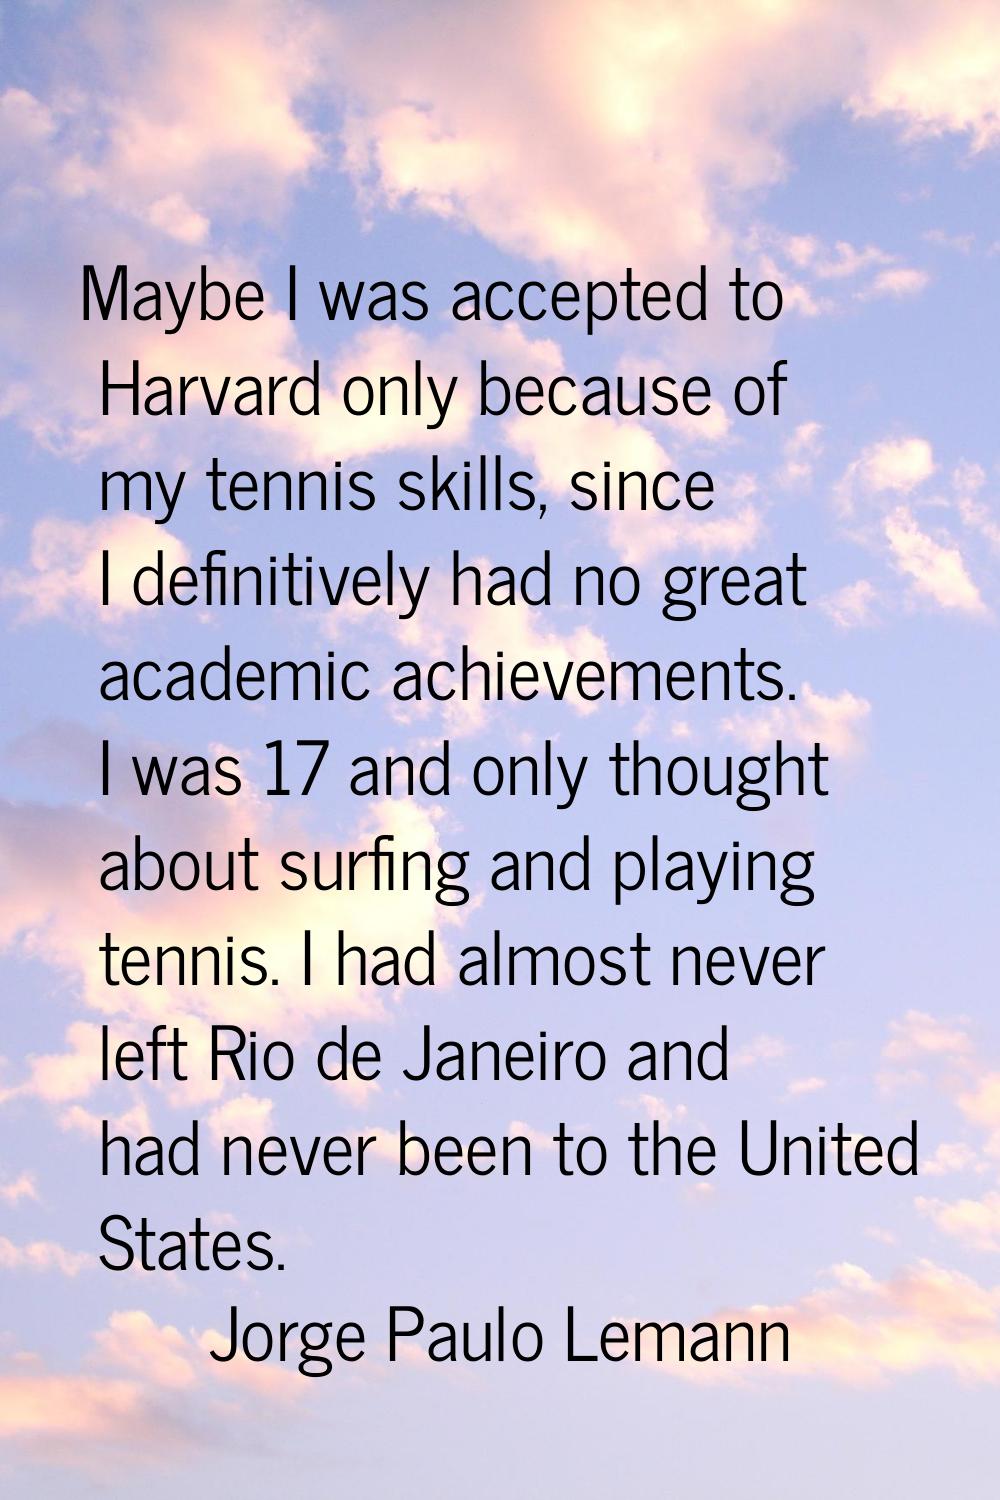 Maybe I was accepted to Harvard only because of my tennis skills, since I definitively had no great